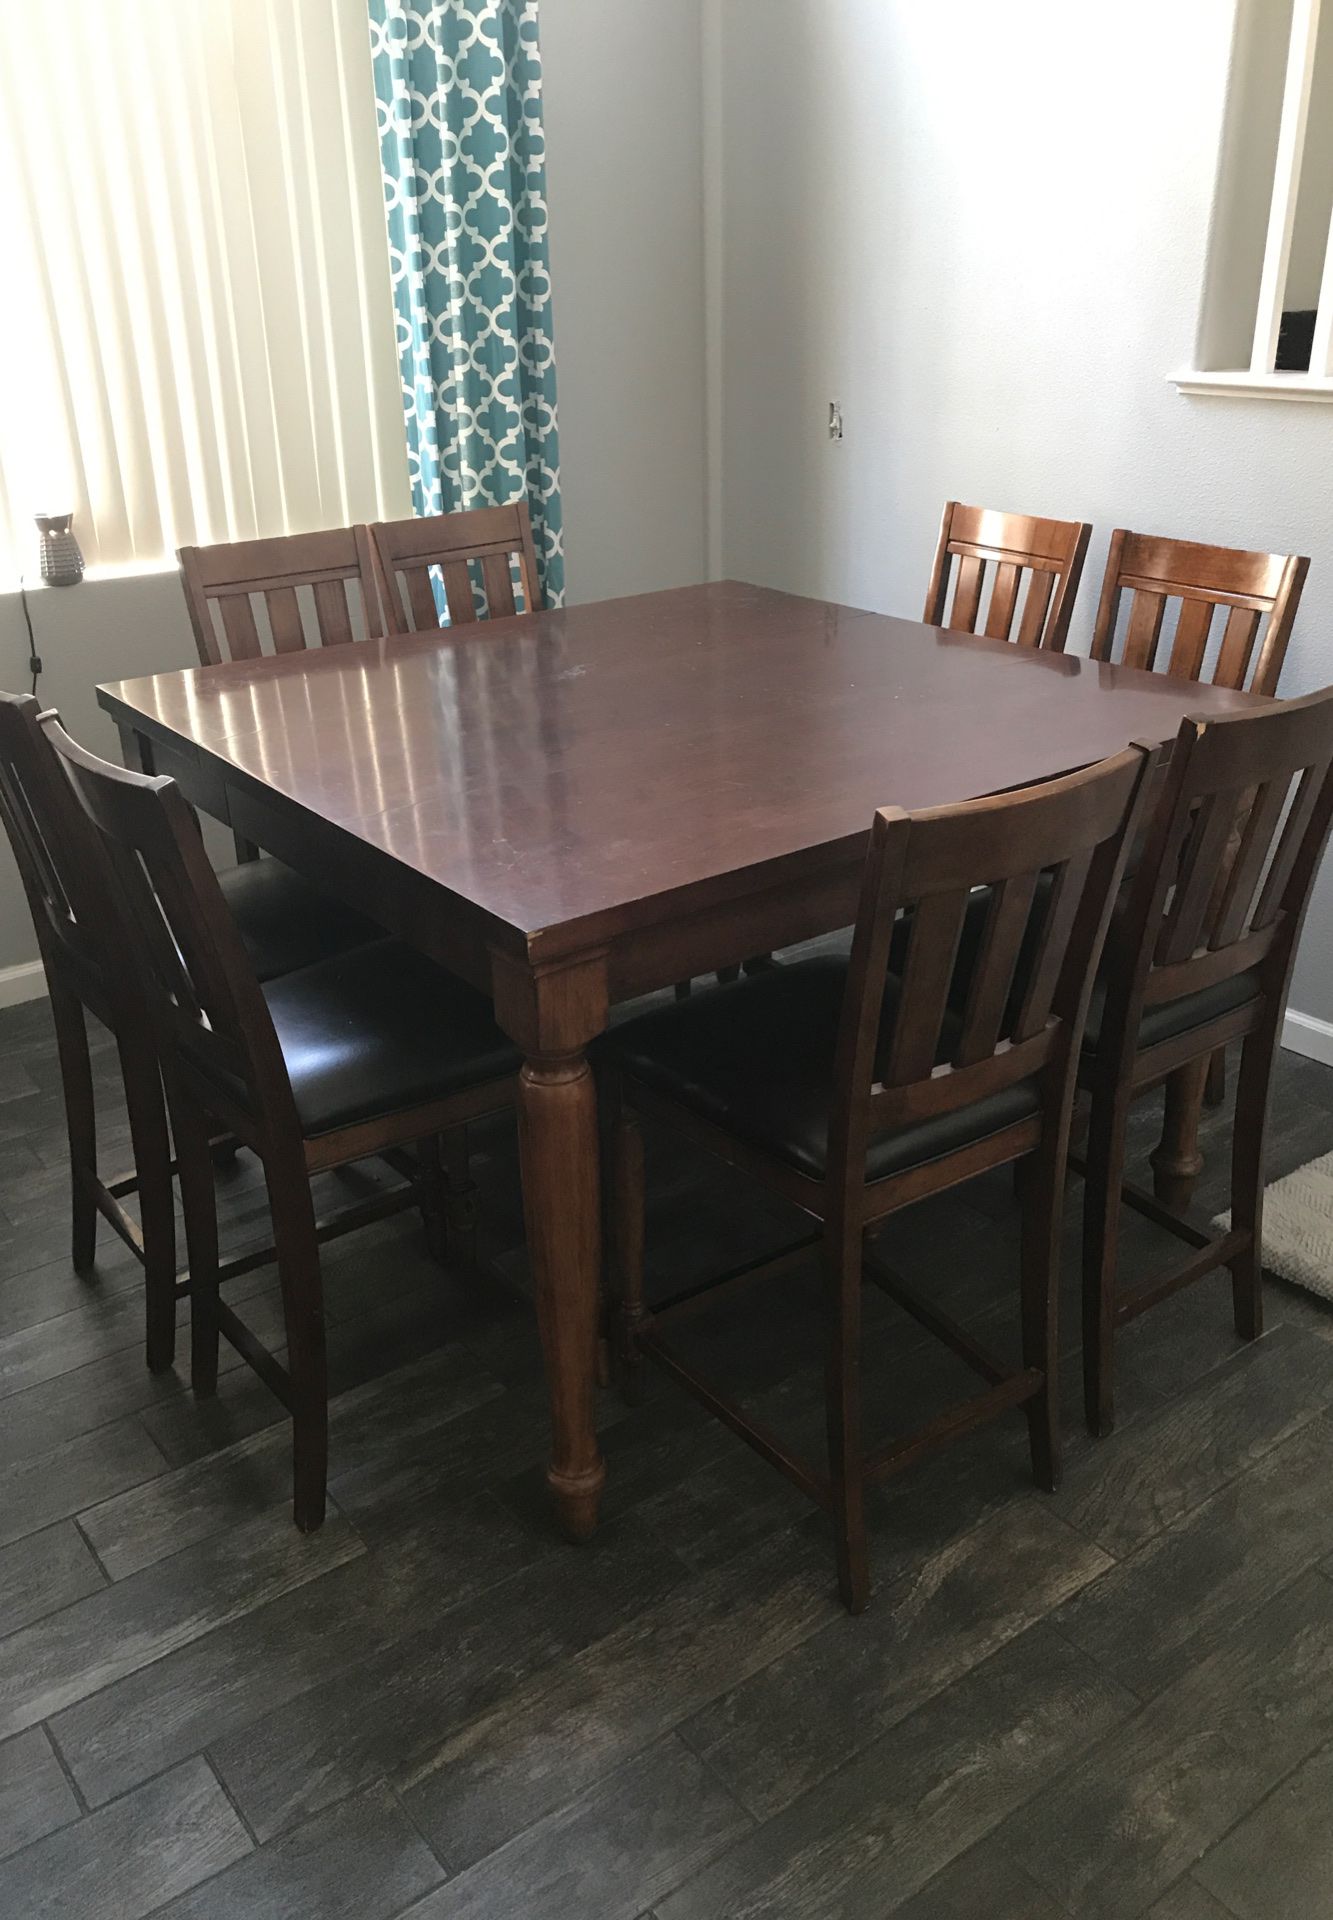 8 chair high barstool kitchen table